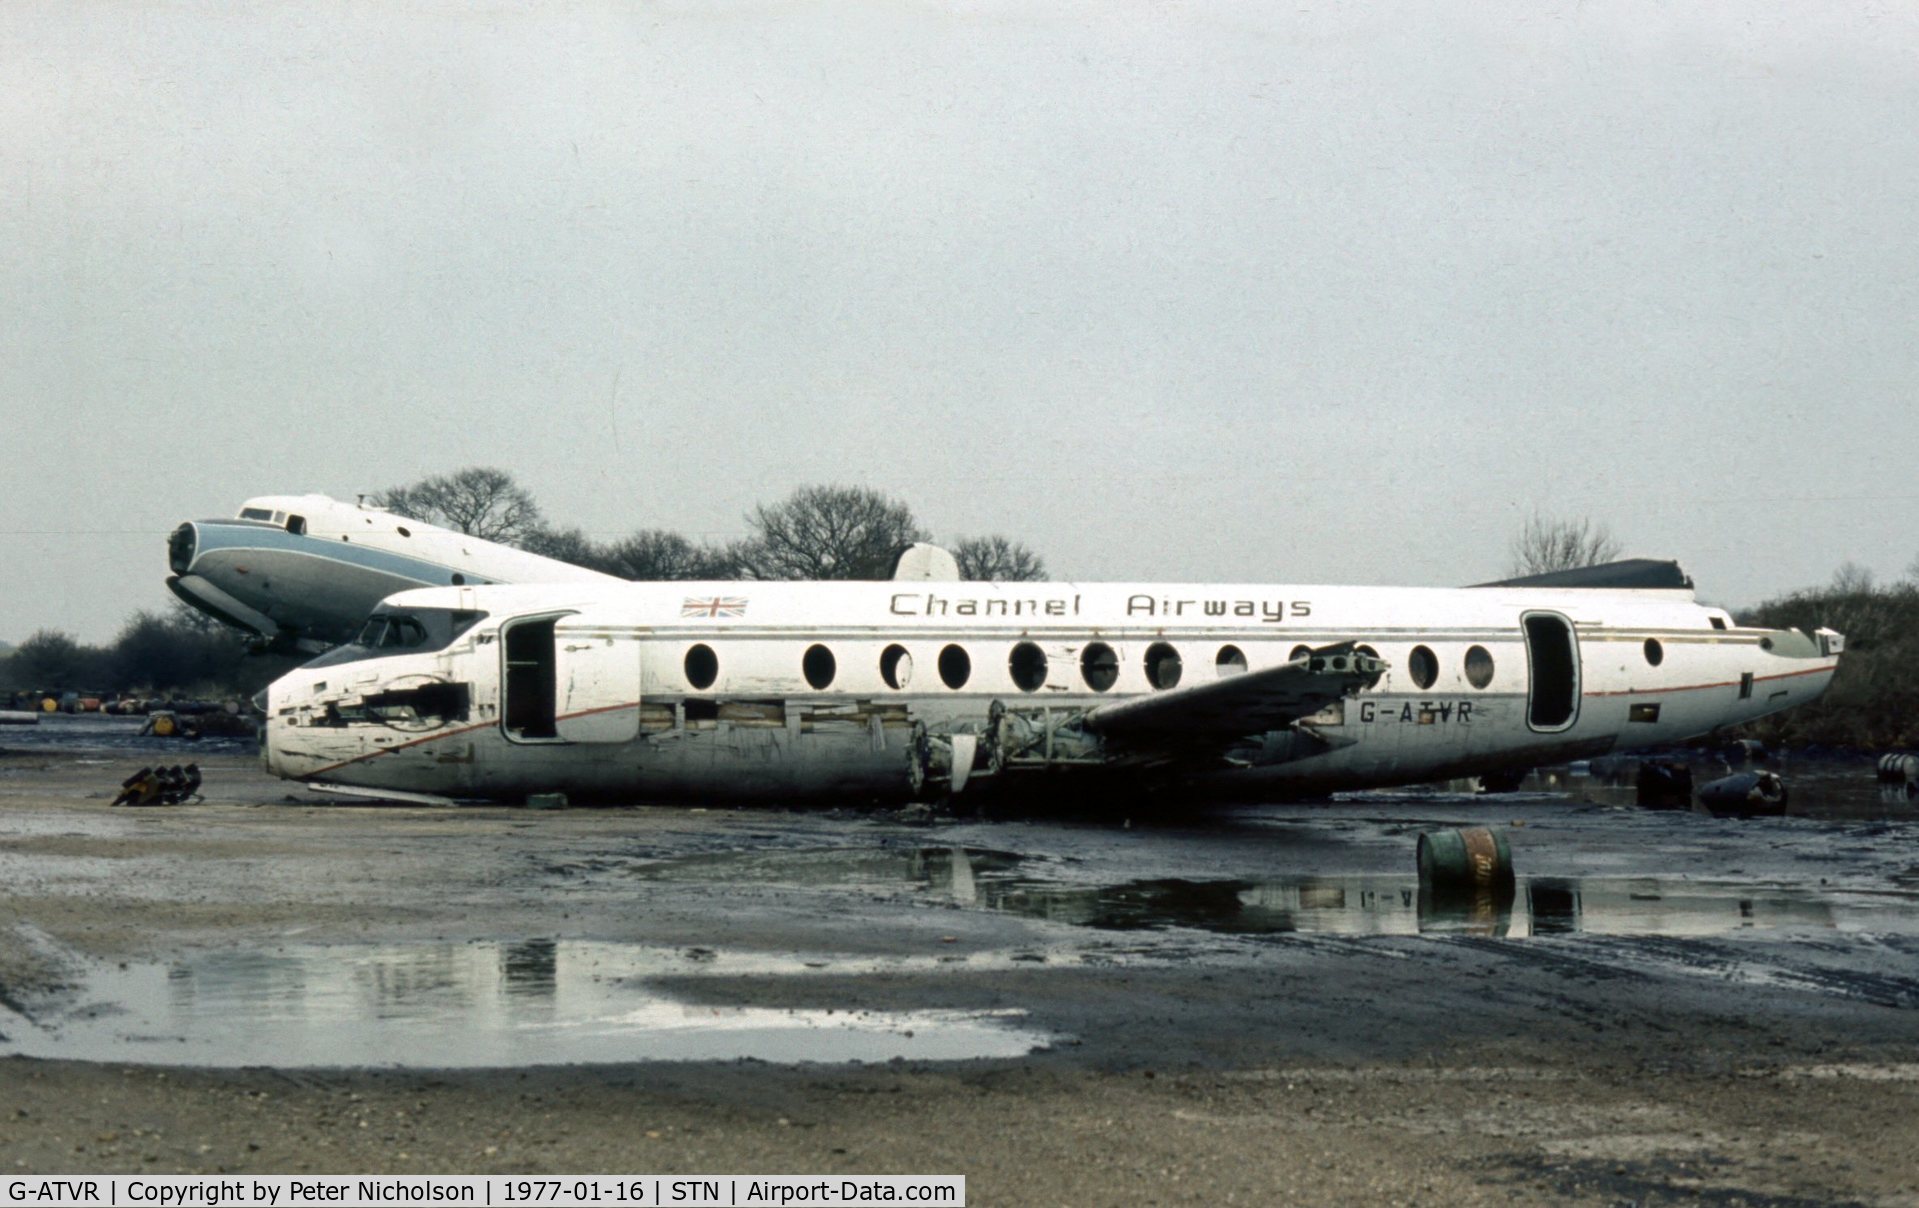 G-ATVR, 1958 Vickers Viscount 812 C/N 365, Viscount of Channel Airways in the Civil Aviation Authority Fire Service School compound at Stansted in January 1977.